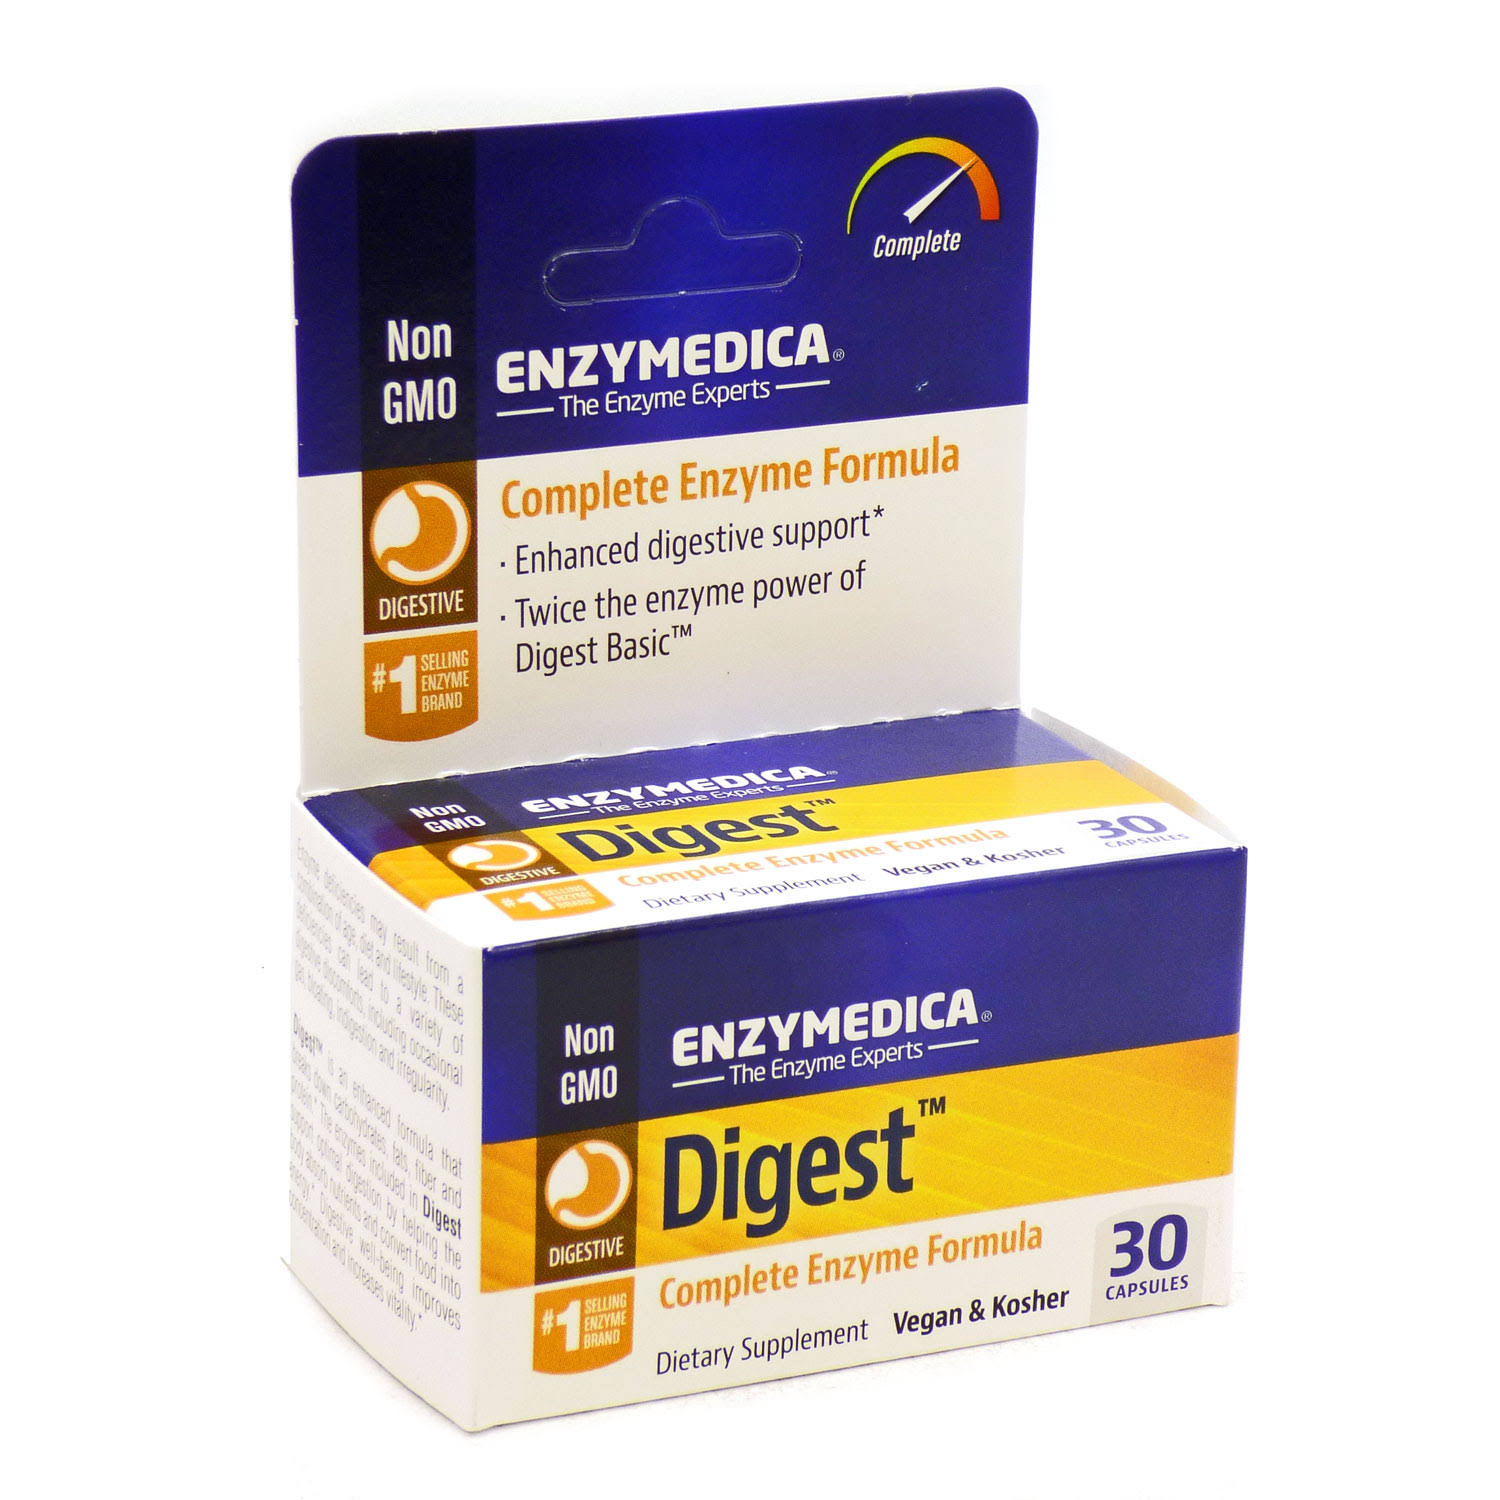 Enzymedica Digest Capsules Dietary Supplement - 30 Capsules